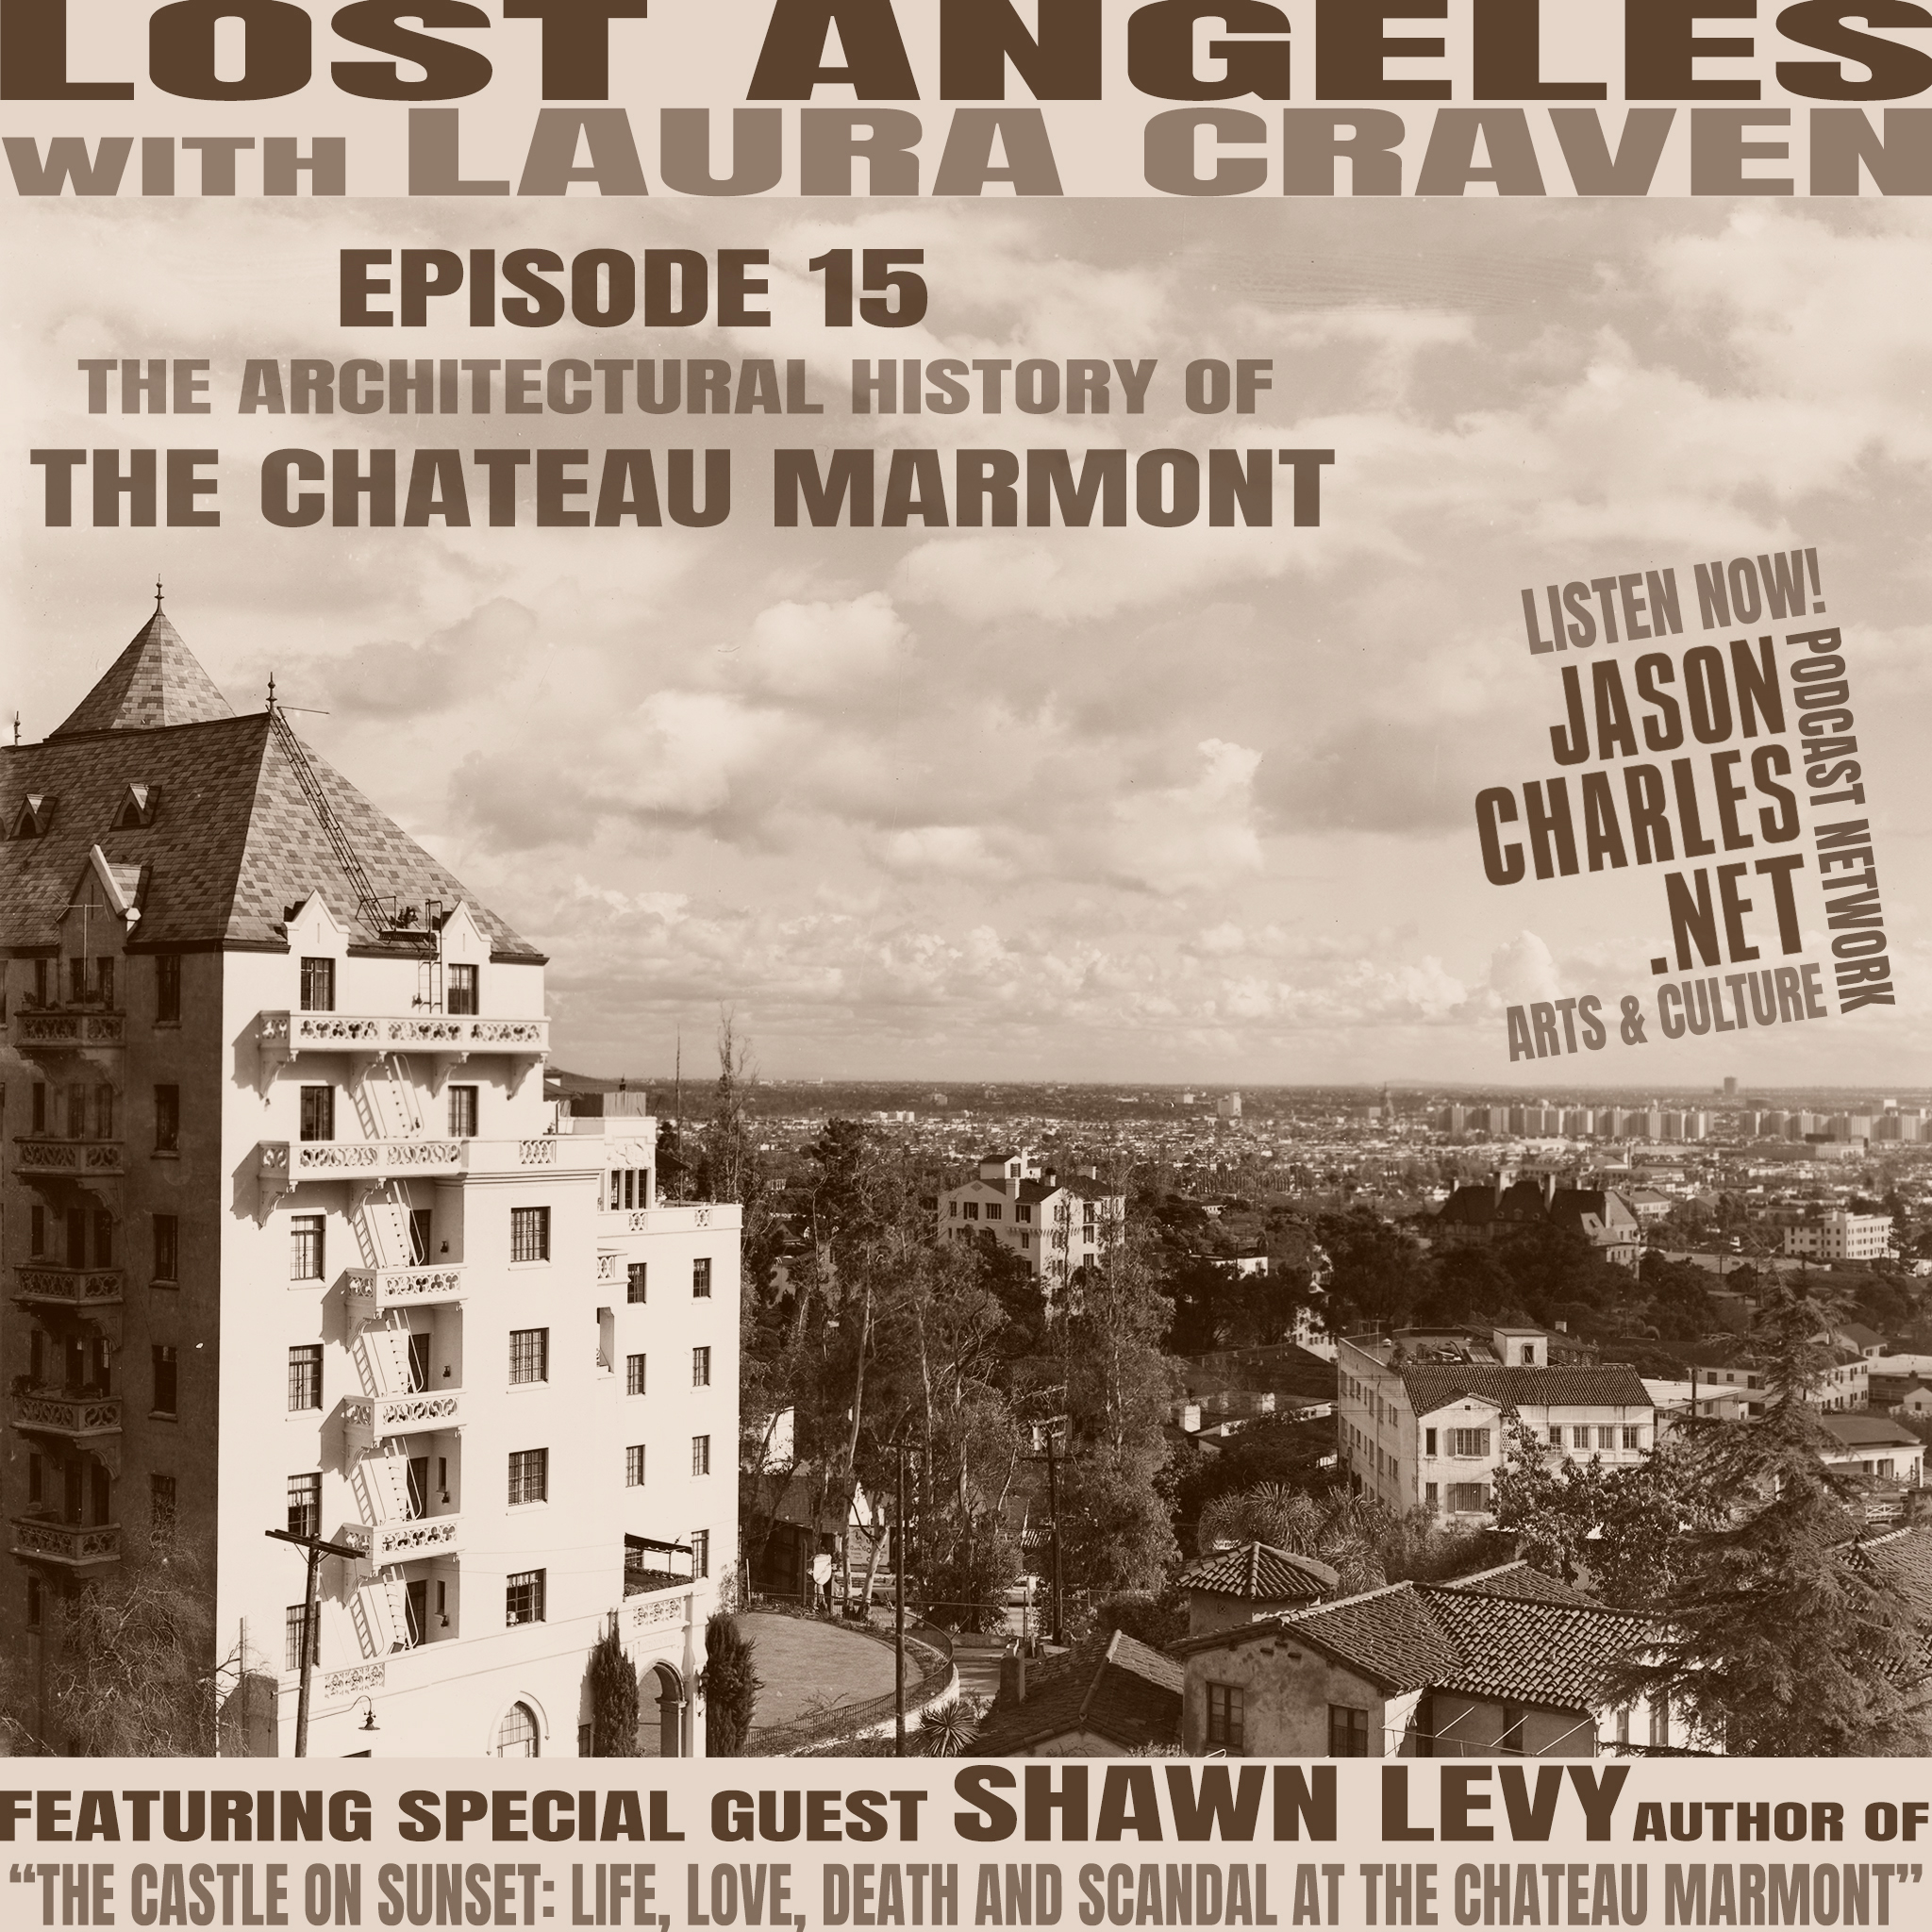 LOST ANGELES Episode 15 Inside THE CHATEAU MARMONT with author SHAWN LEVY